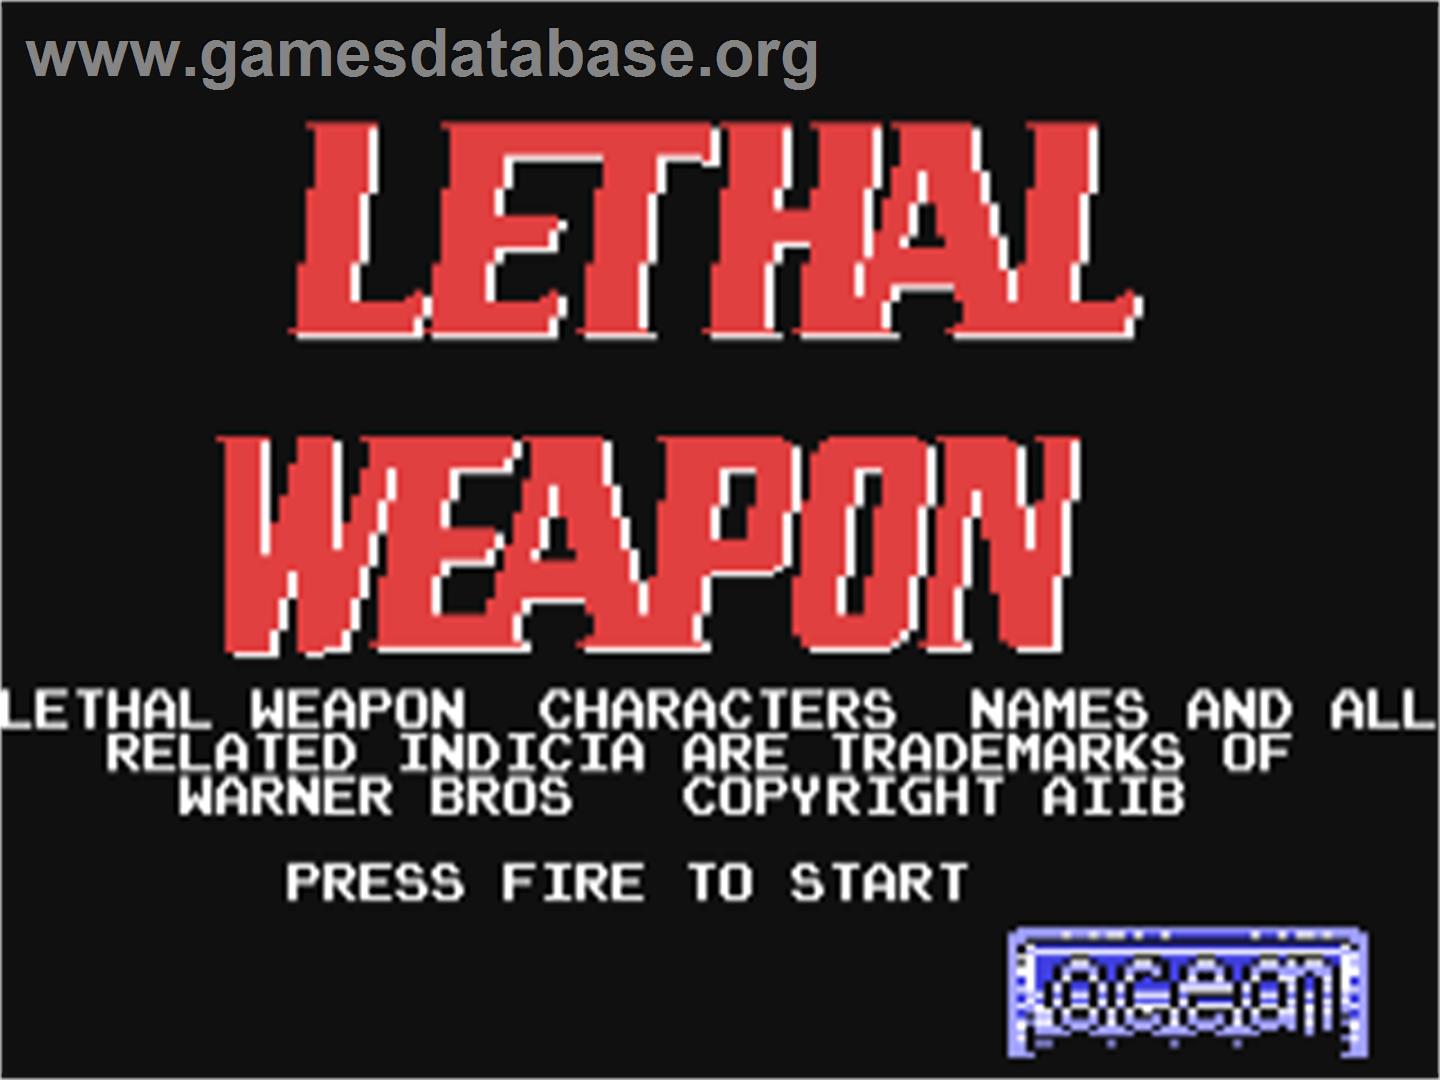 Lethal Weapon - Commodore 64 - Artwork - Title Screen